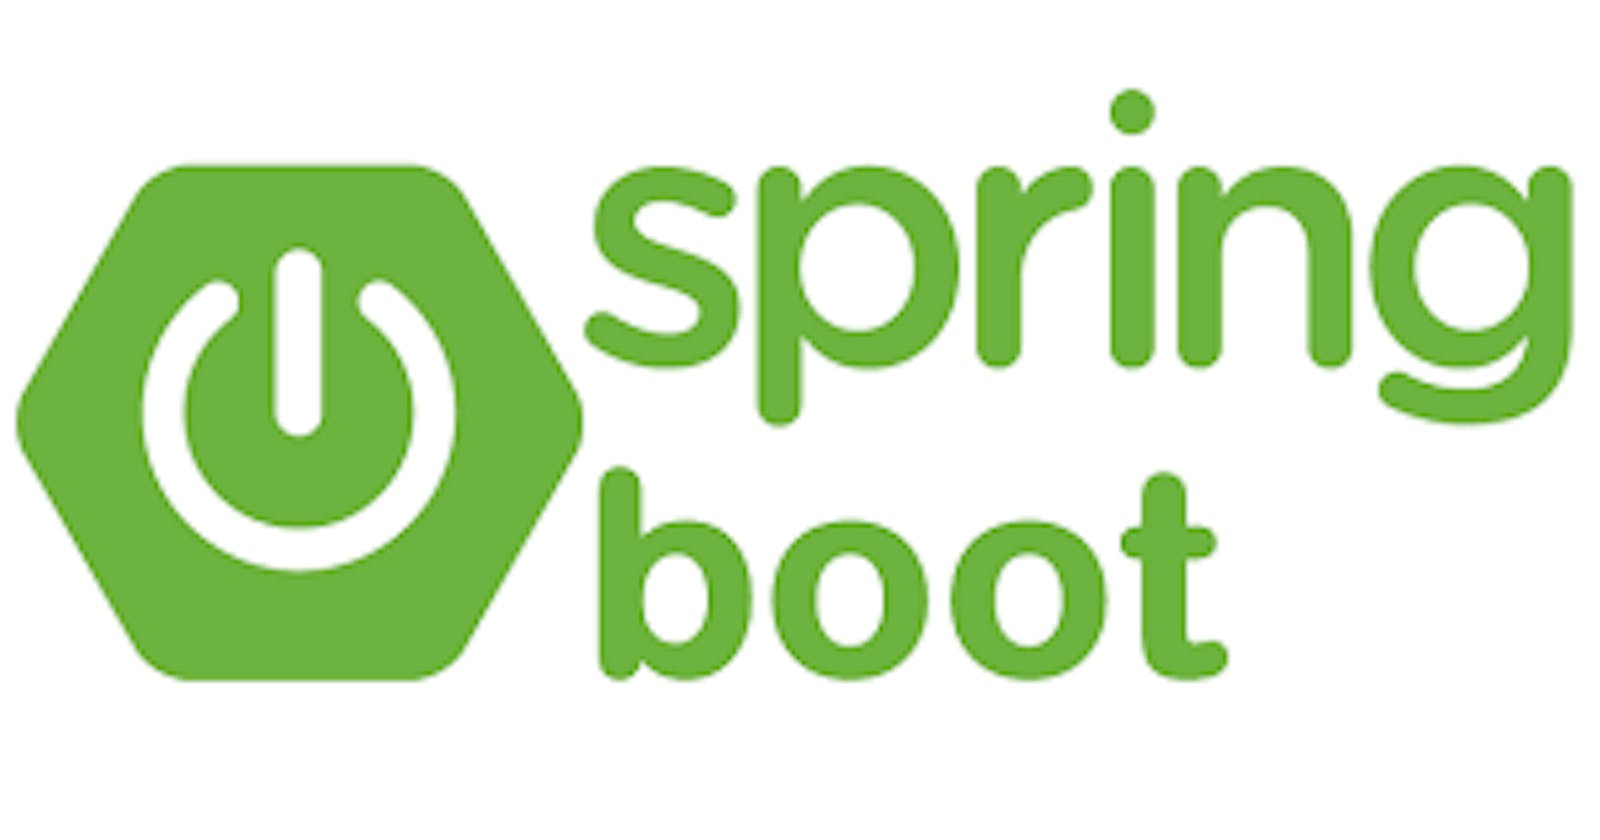 How to make Basic Web Socket with spring